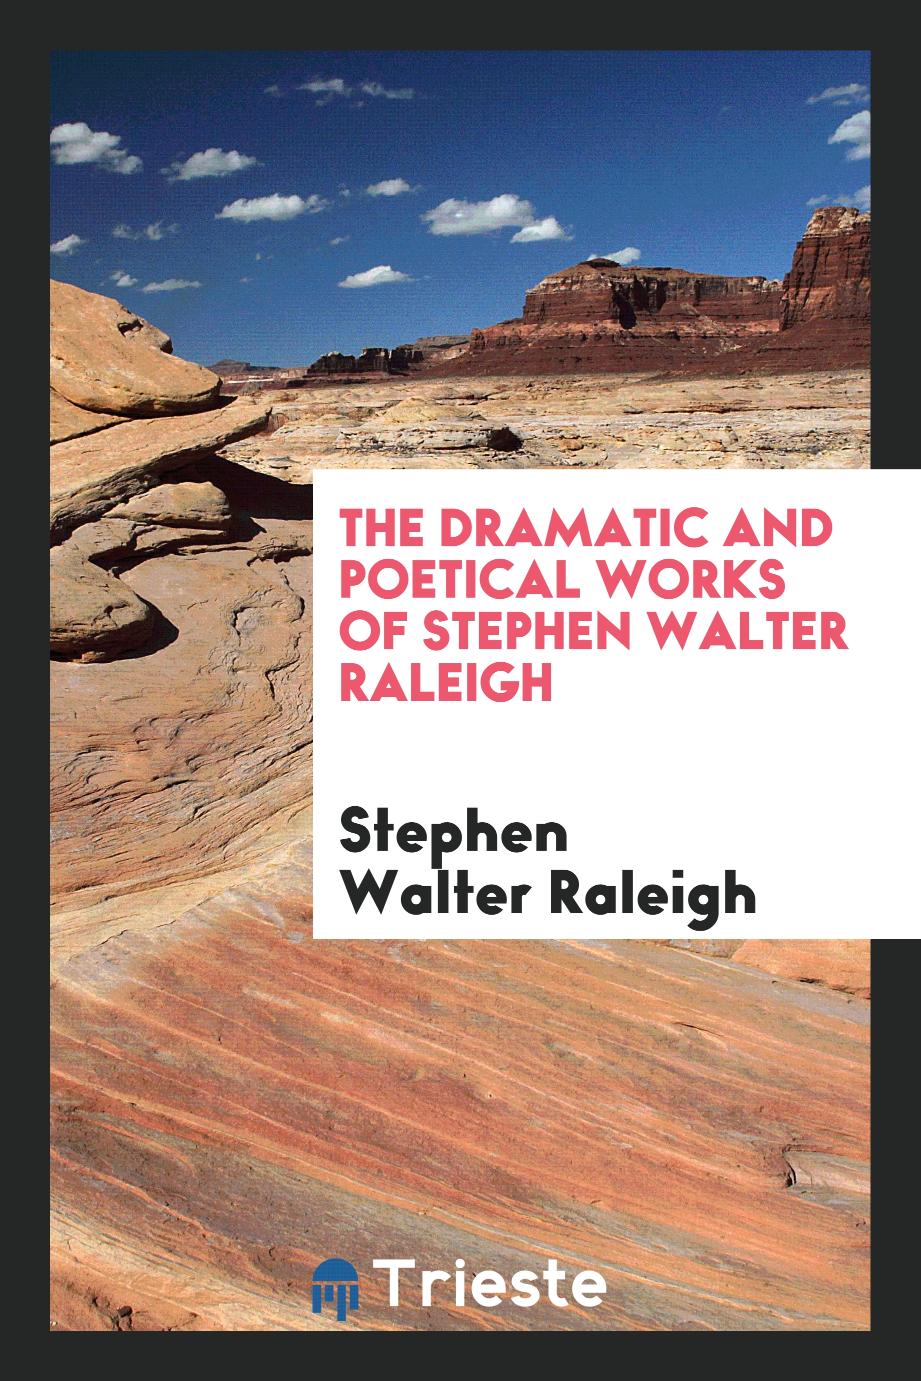 The Dramatic and Poetical Works of Stephen Walter Raleigh